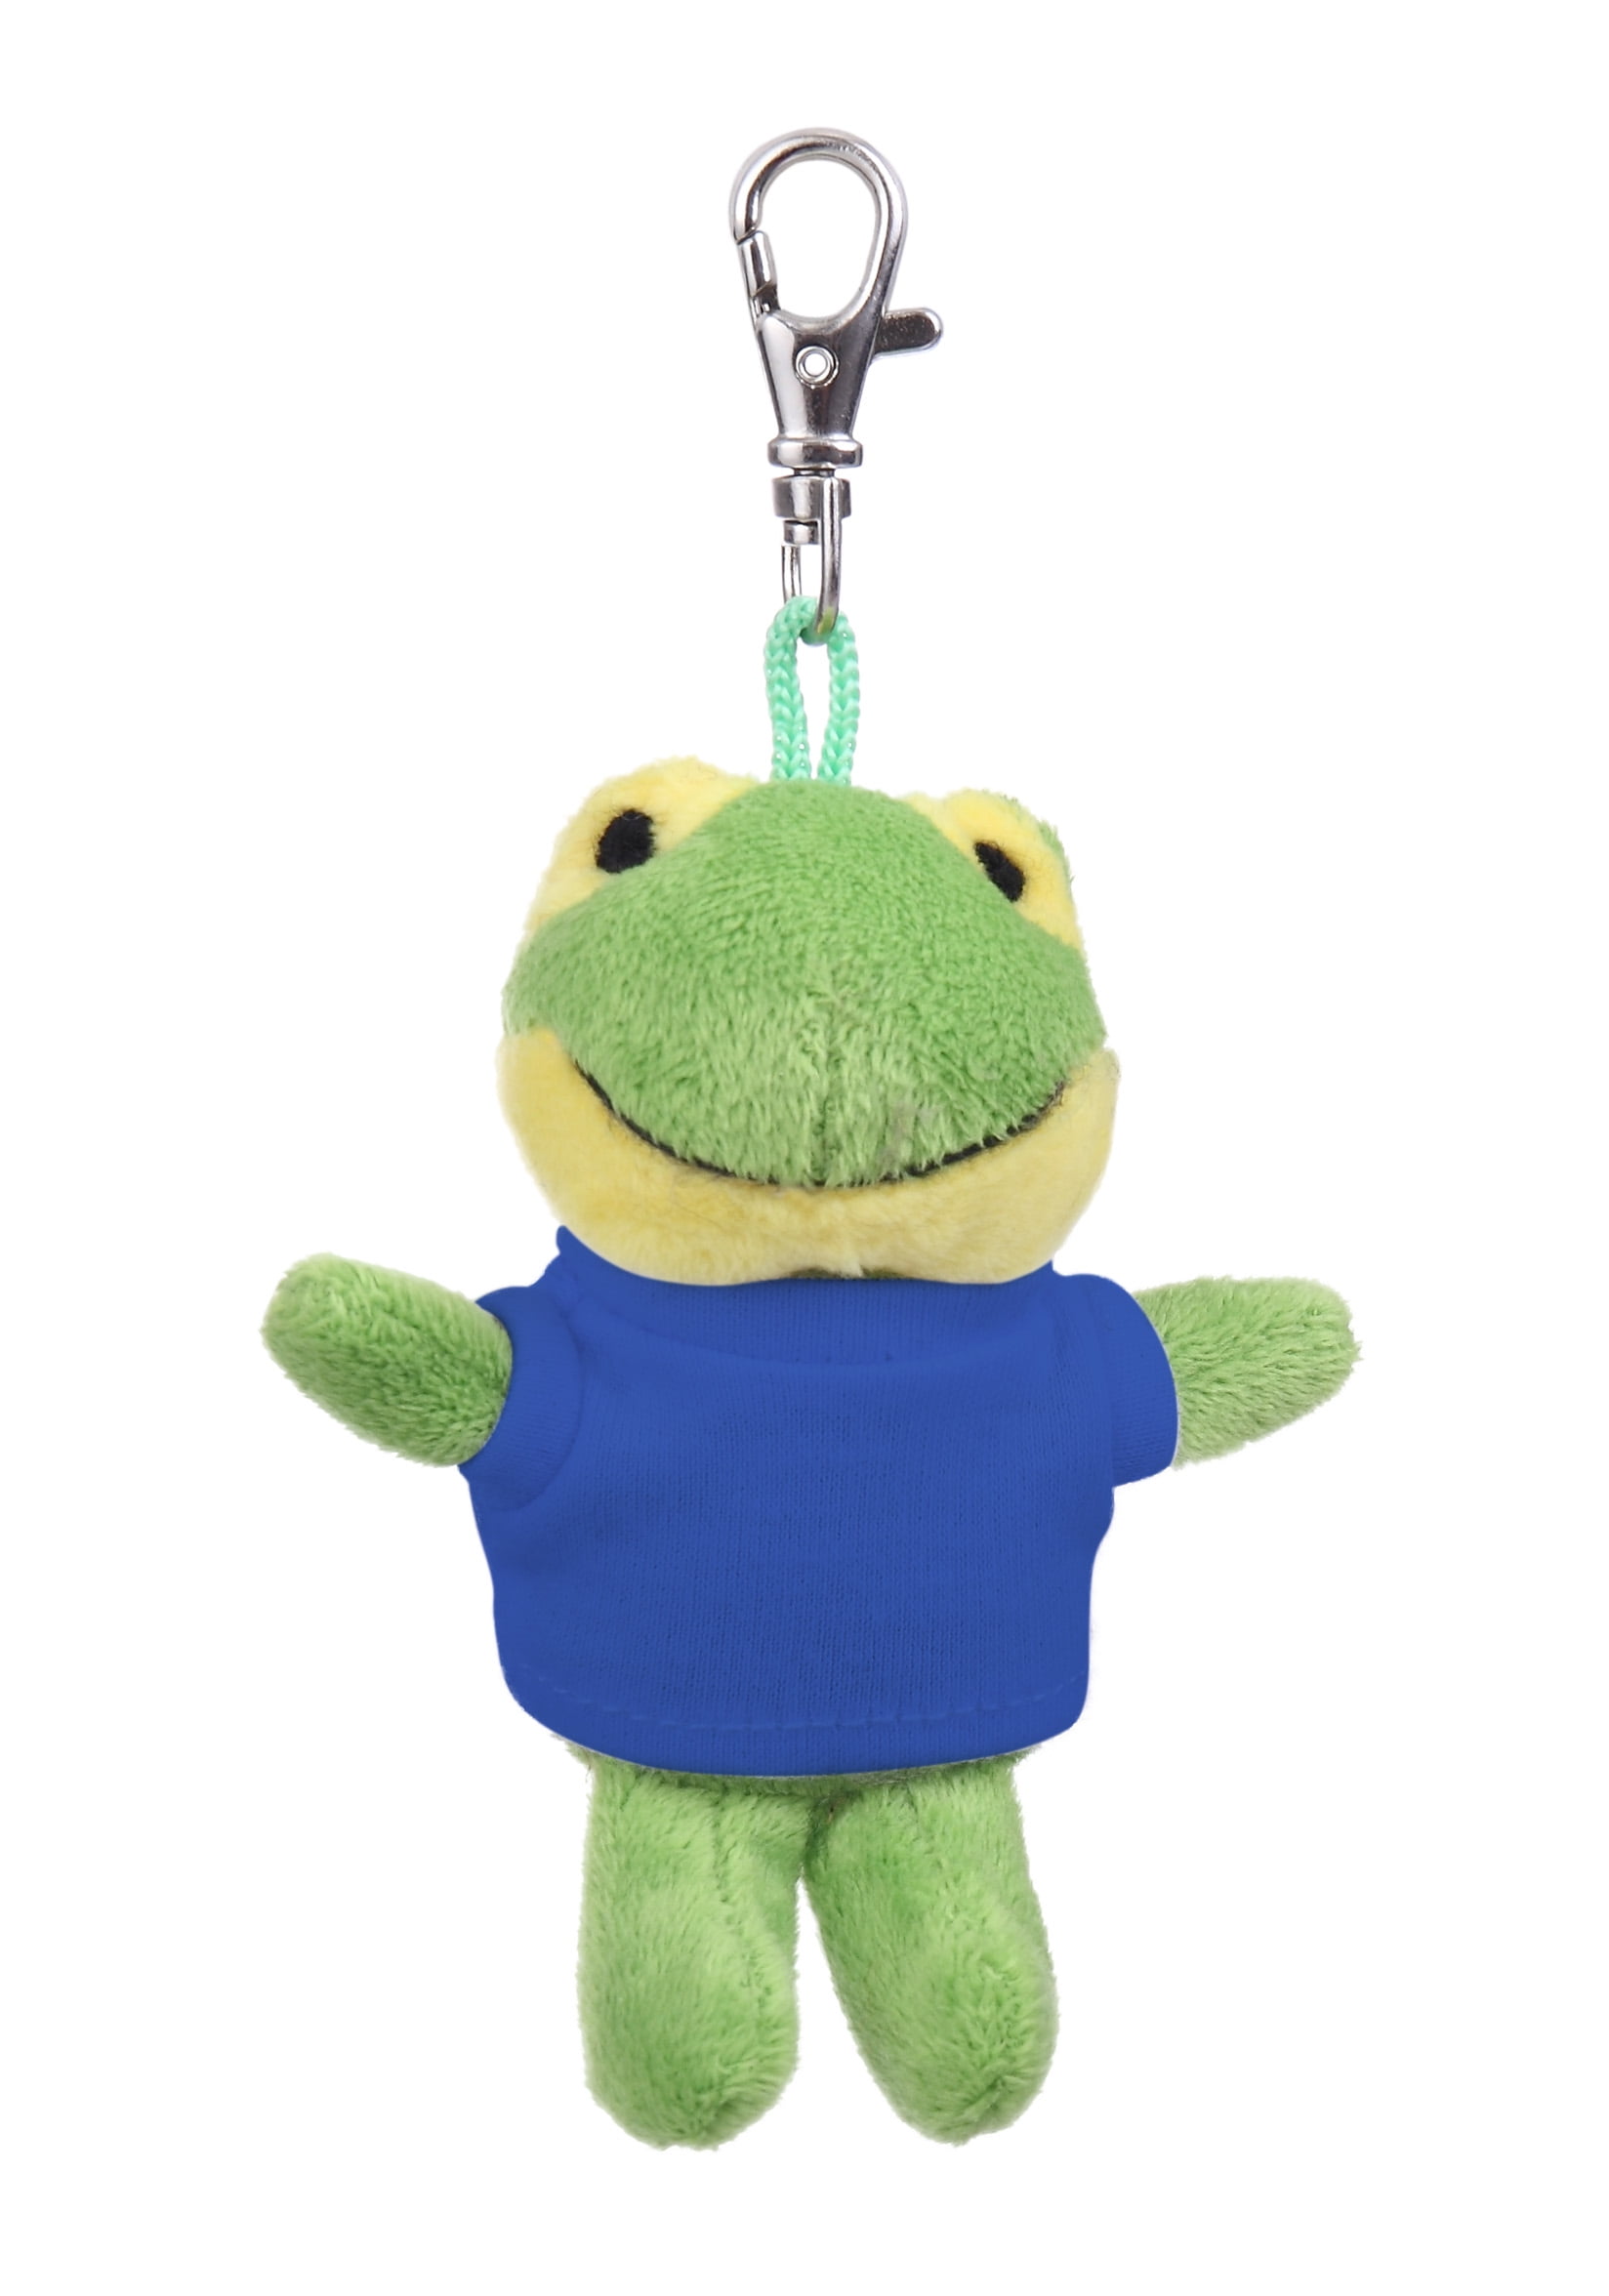 NO NAME CLEARANCE PRICE 10 x KEY PALS BLUE MONKEY  KEYRINGS SAME DAY POSTAGE 